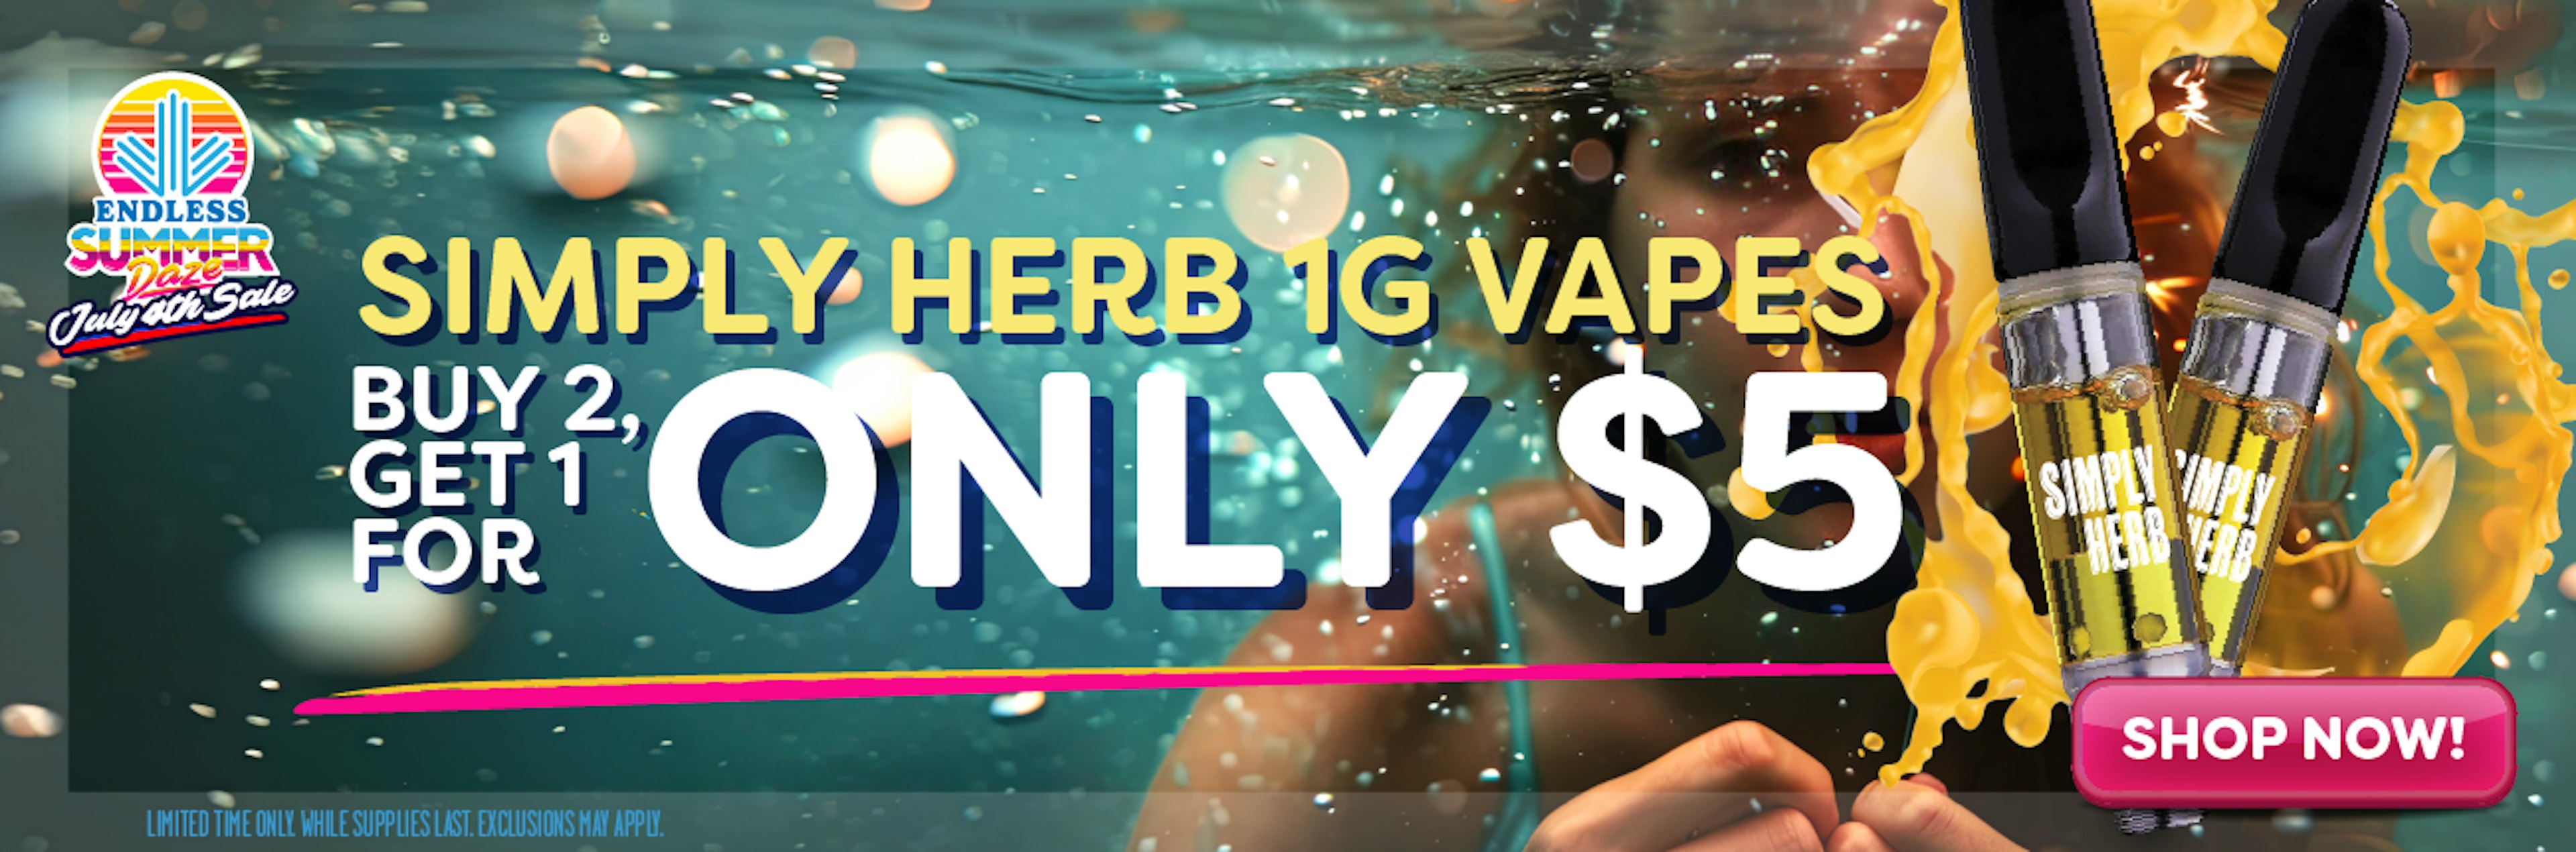 Simply Herb Vapes B2G1 for $5 (on through 7/7)